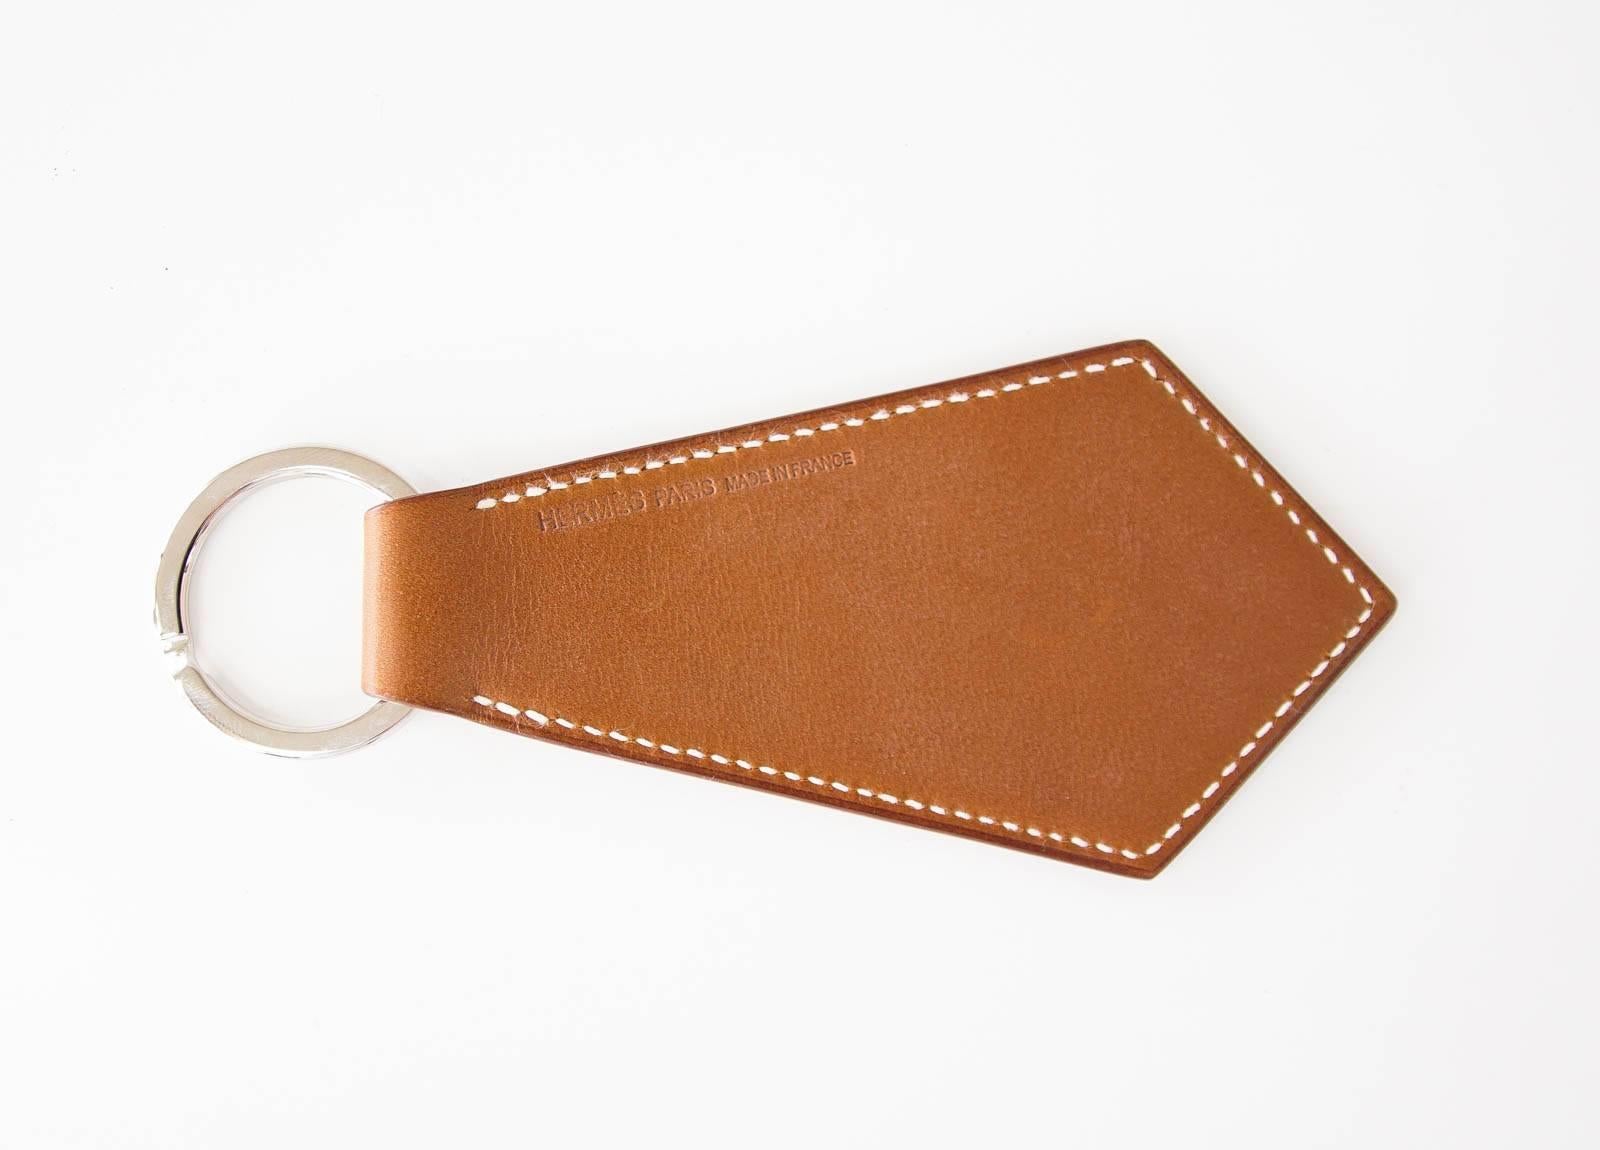 Guaranteed authentic HERMES Super Lucky Charms Tab.
Tie shaped key ring in coveted Barenia leather.
Various detailed Lucky Charm etchings in the leather.
Signature HERMES PARIS Made in France is stamped on reverse side.
NEW or NEVER WORN.  Comes